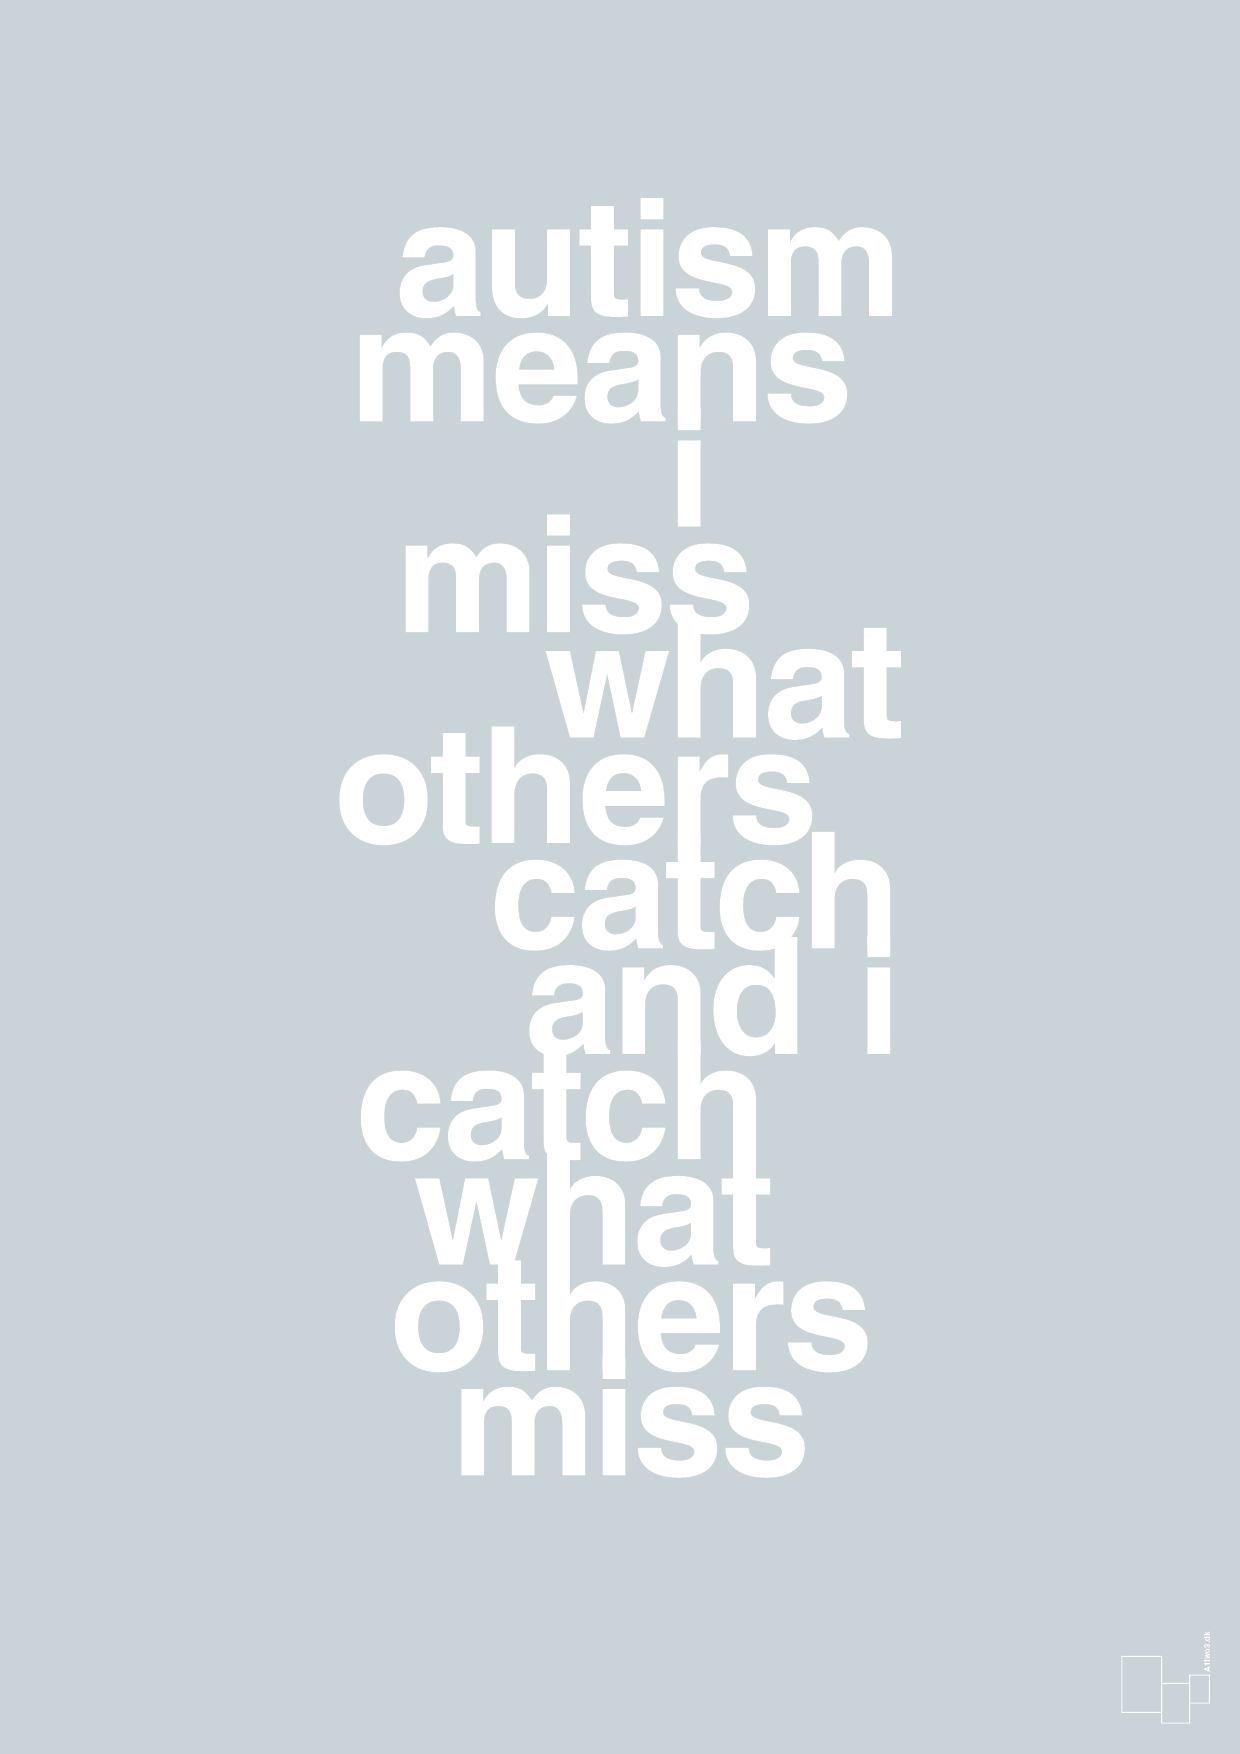 autism means i miss what others catch and i catch what others miss - Plakat med Samfund i Light Drizzle